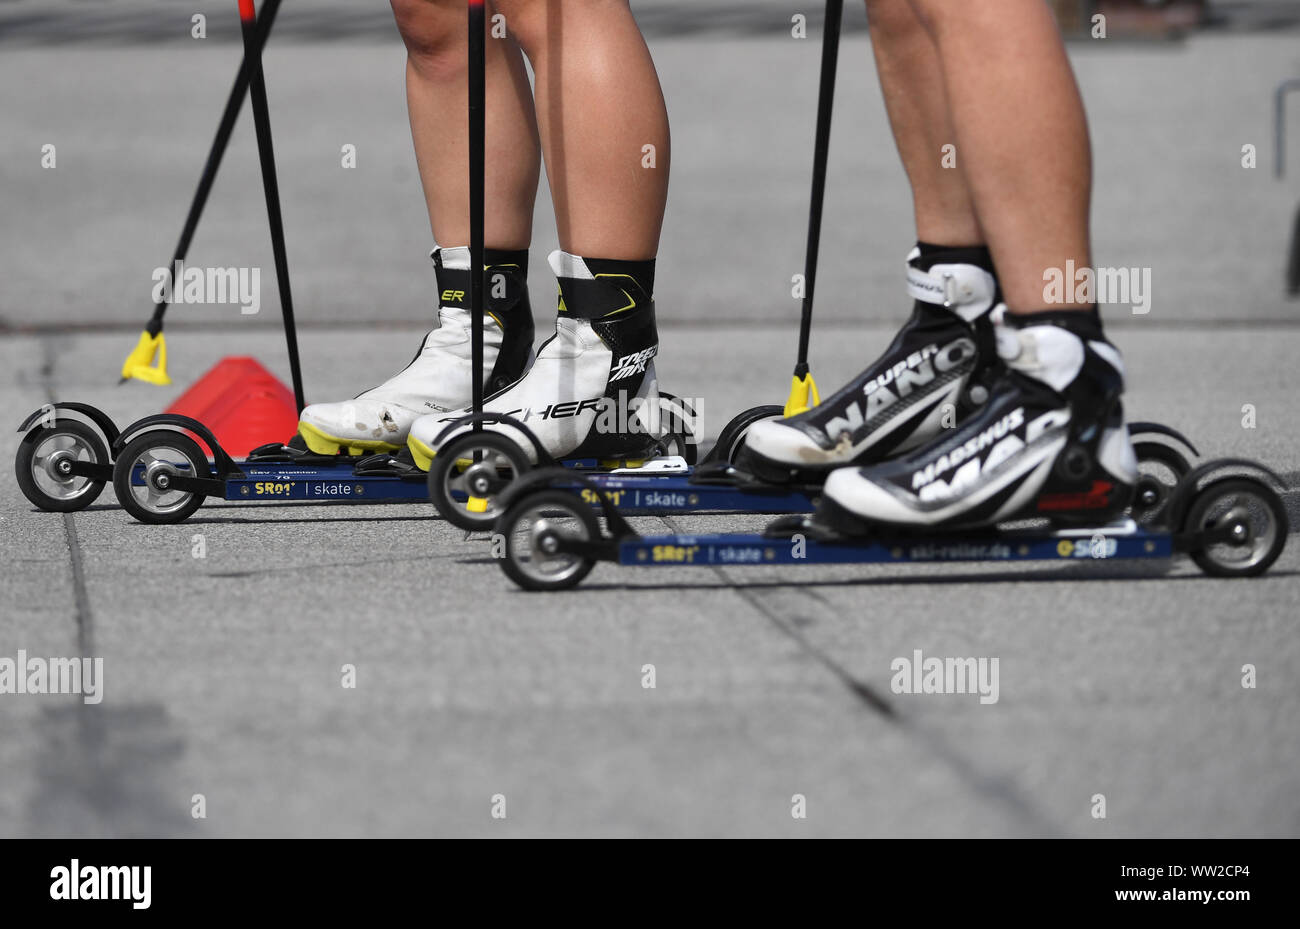 Ruhpolding, Germany. 12th Sep, 2019. Biathletes train on roller skis at the Biathlon Media Day of the German Ski Association. Credit: Angelika Warmuth/dpa/Alamy Live News Stock Photo